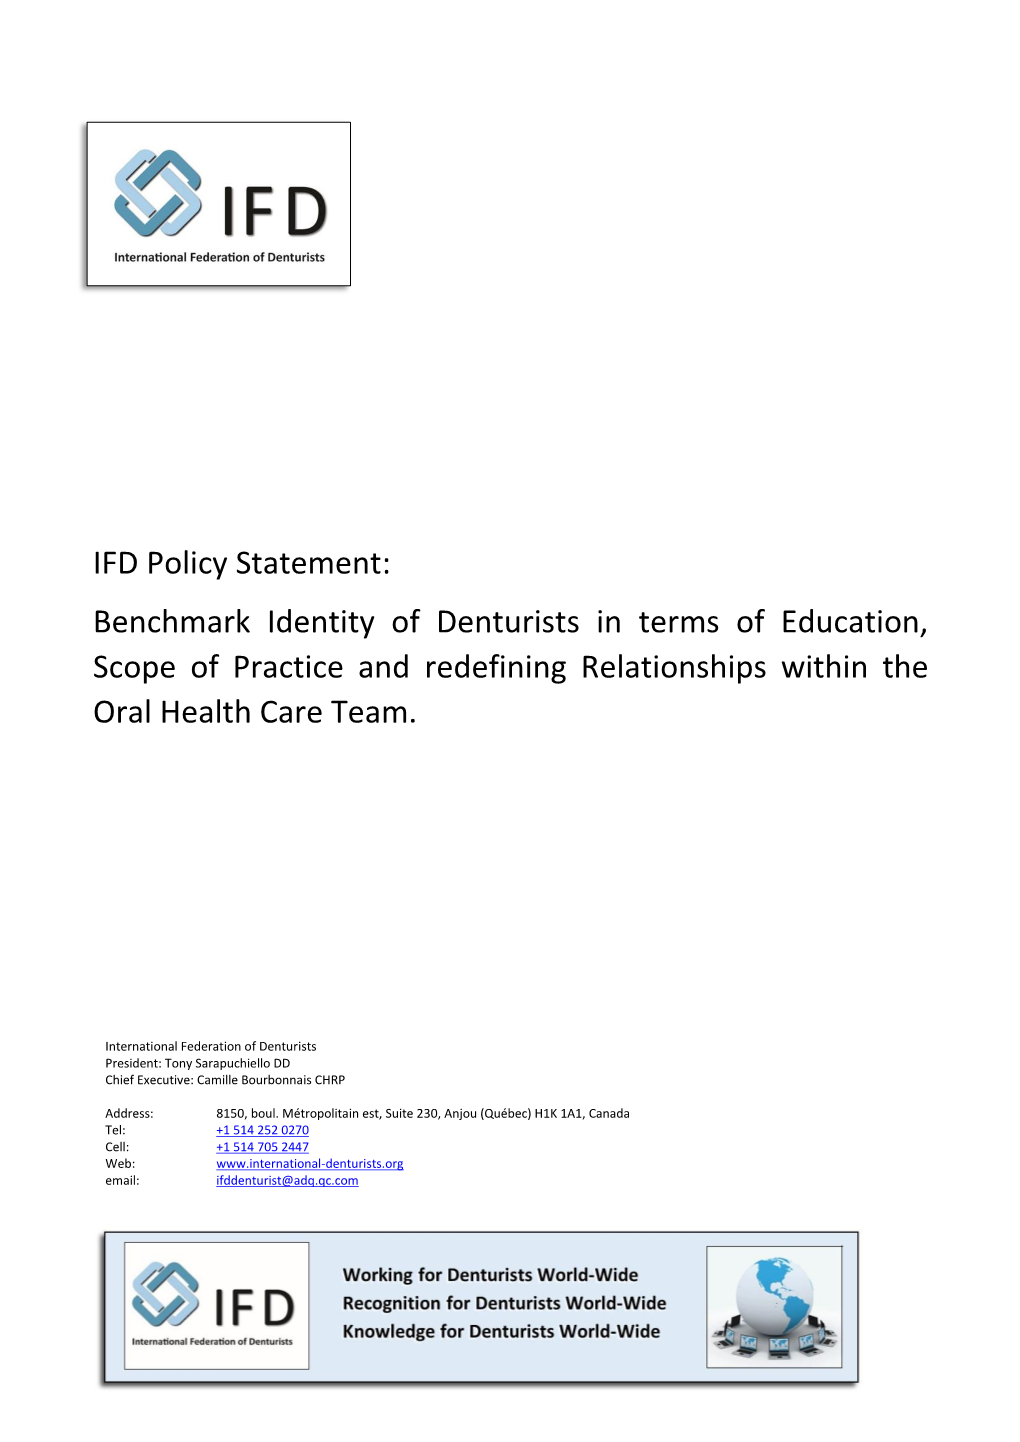 IFD Policy Statement: Benchmark Identity of Denturists in Terms of Education, Scope of Practice and Redefining Relationships Within the Oral Health Care Team